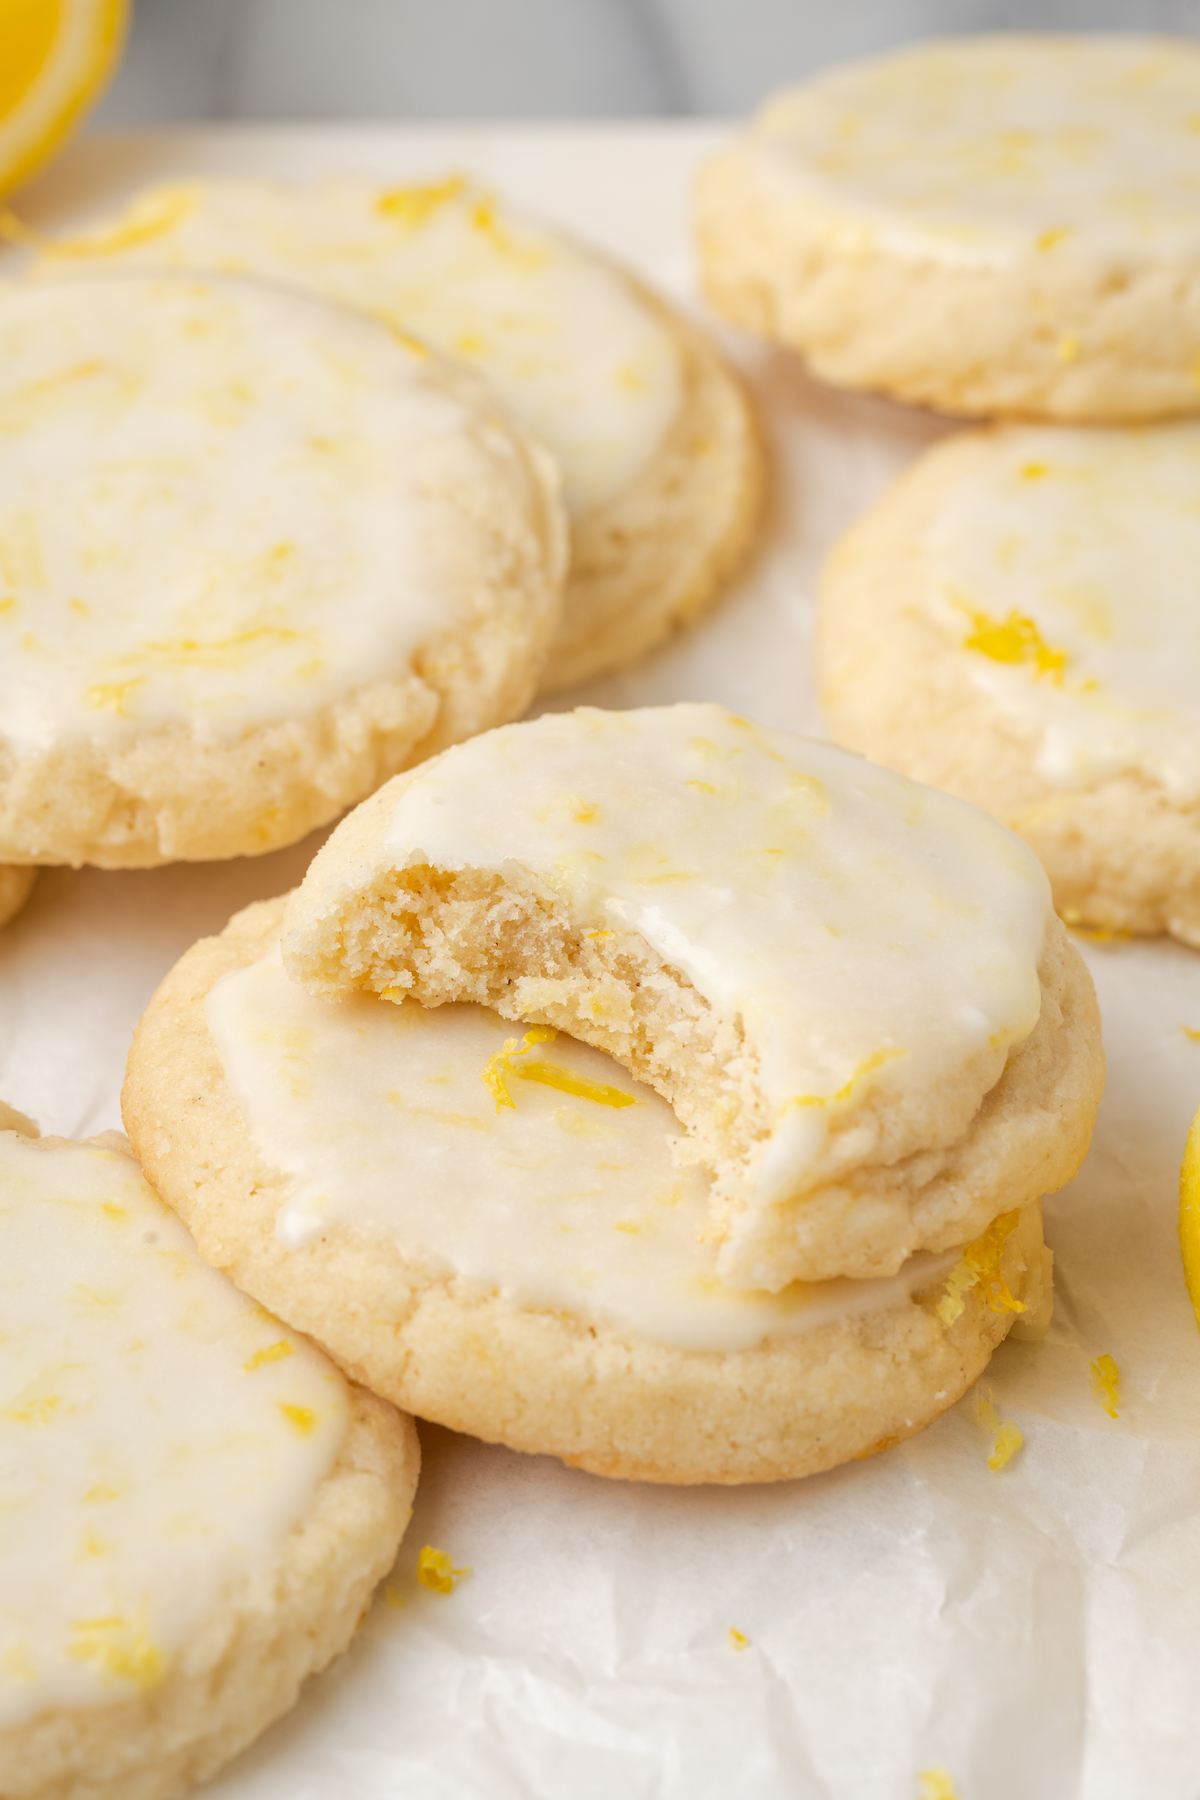 Lemon cookies on crumpled parchment paper, with bite taken out of one to show soft texture